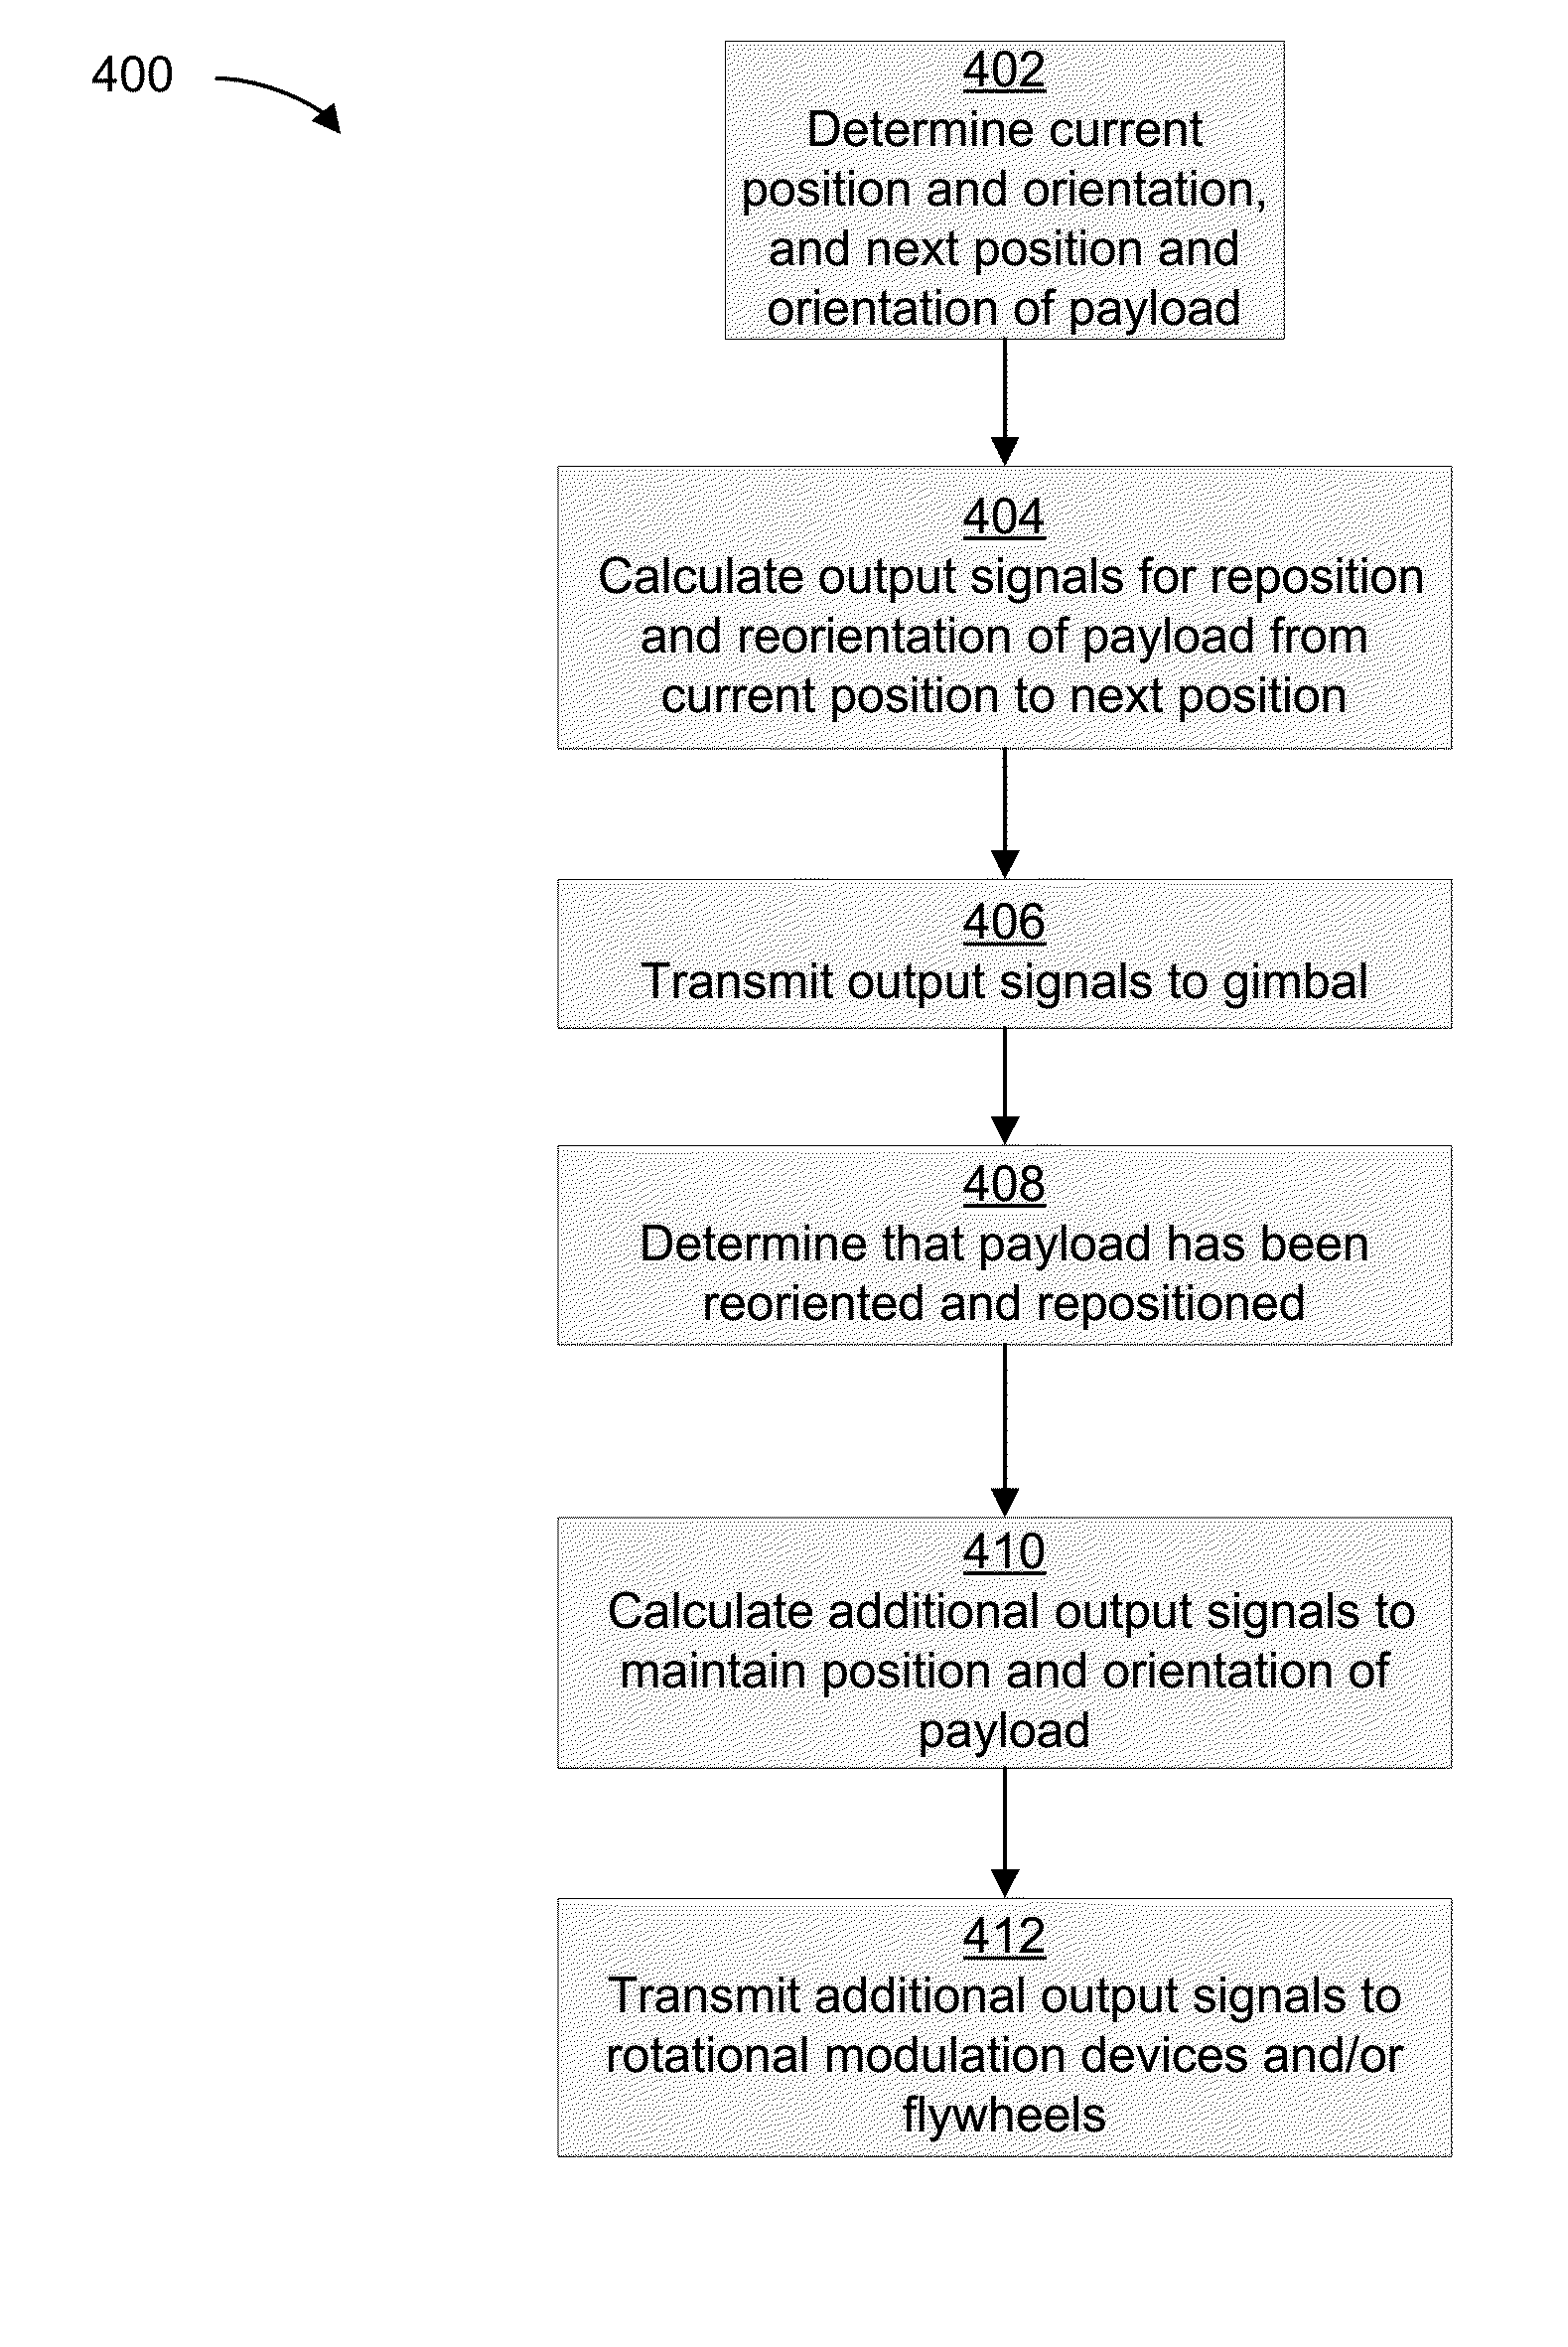 Payload Orientation Control and Stabilization